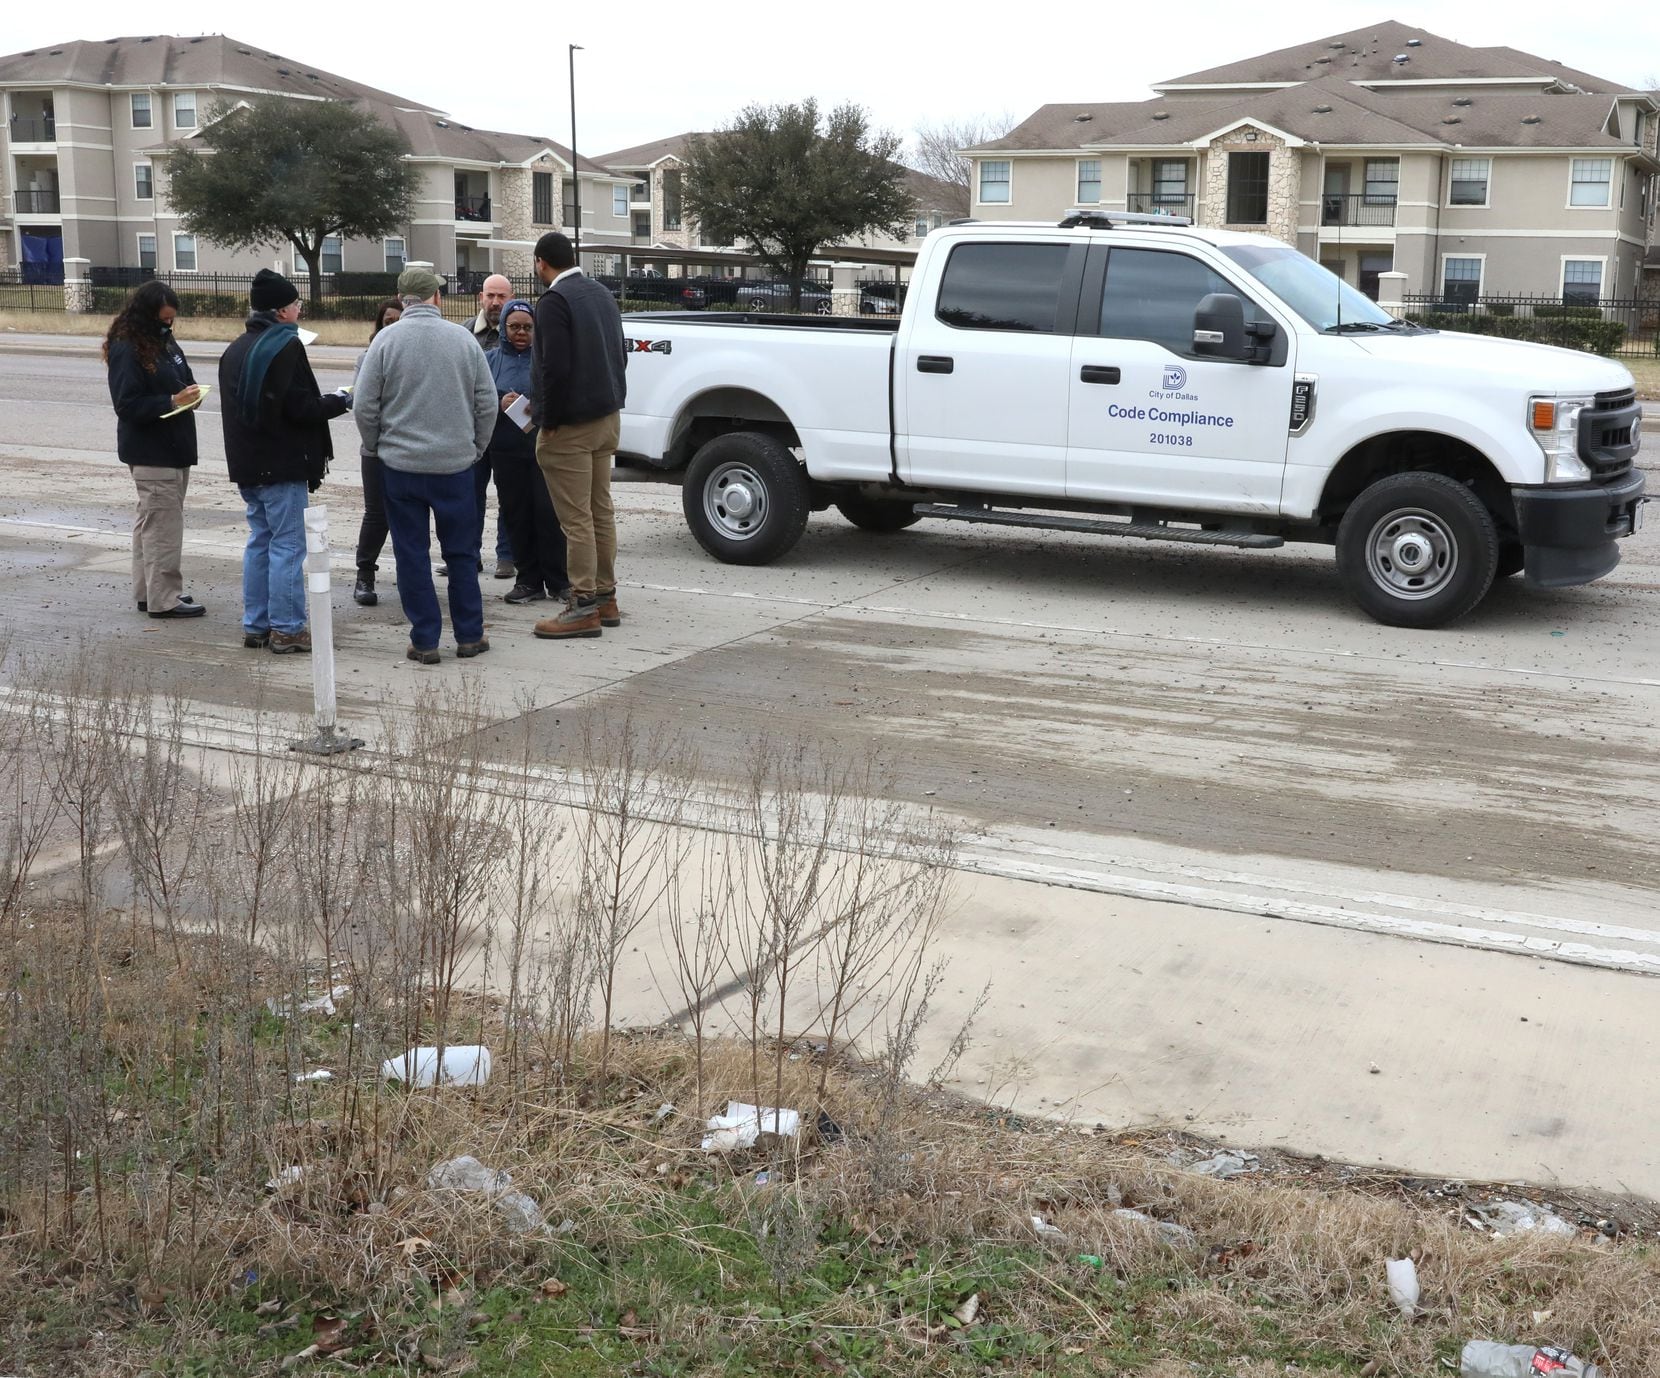 A total of seven Dallas city workers showed up to handle a trash complaint from Dallas...